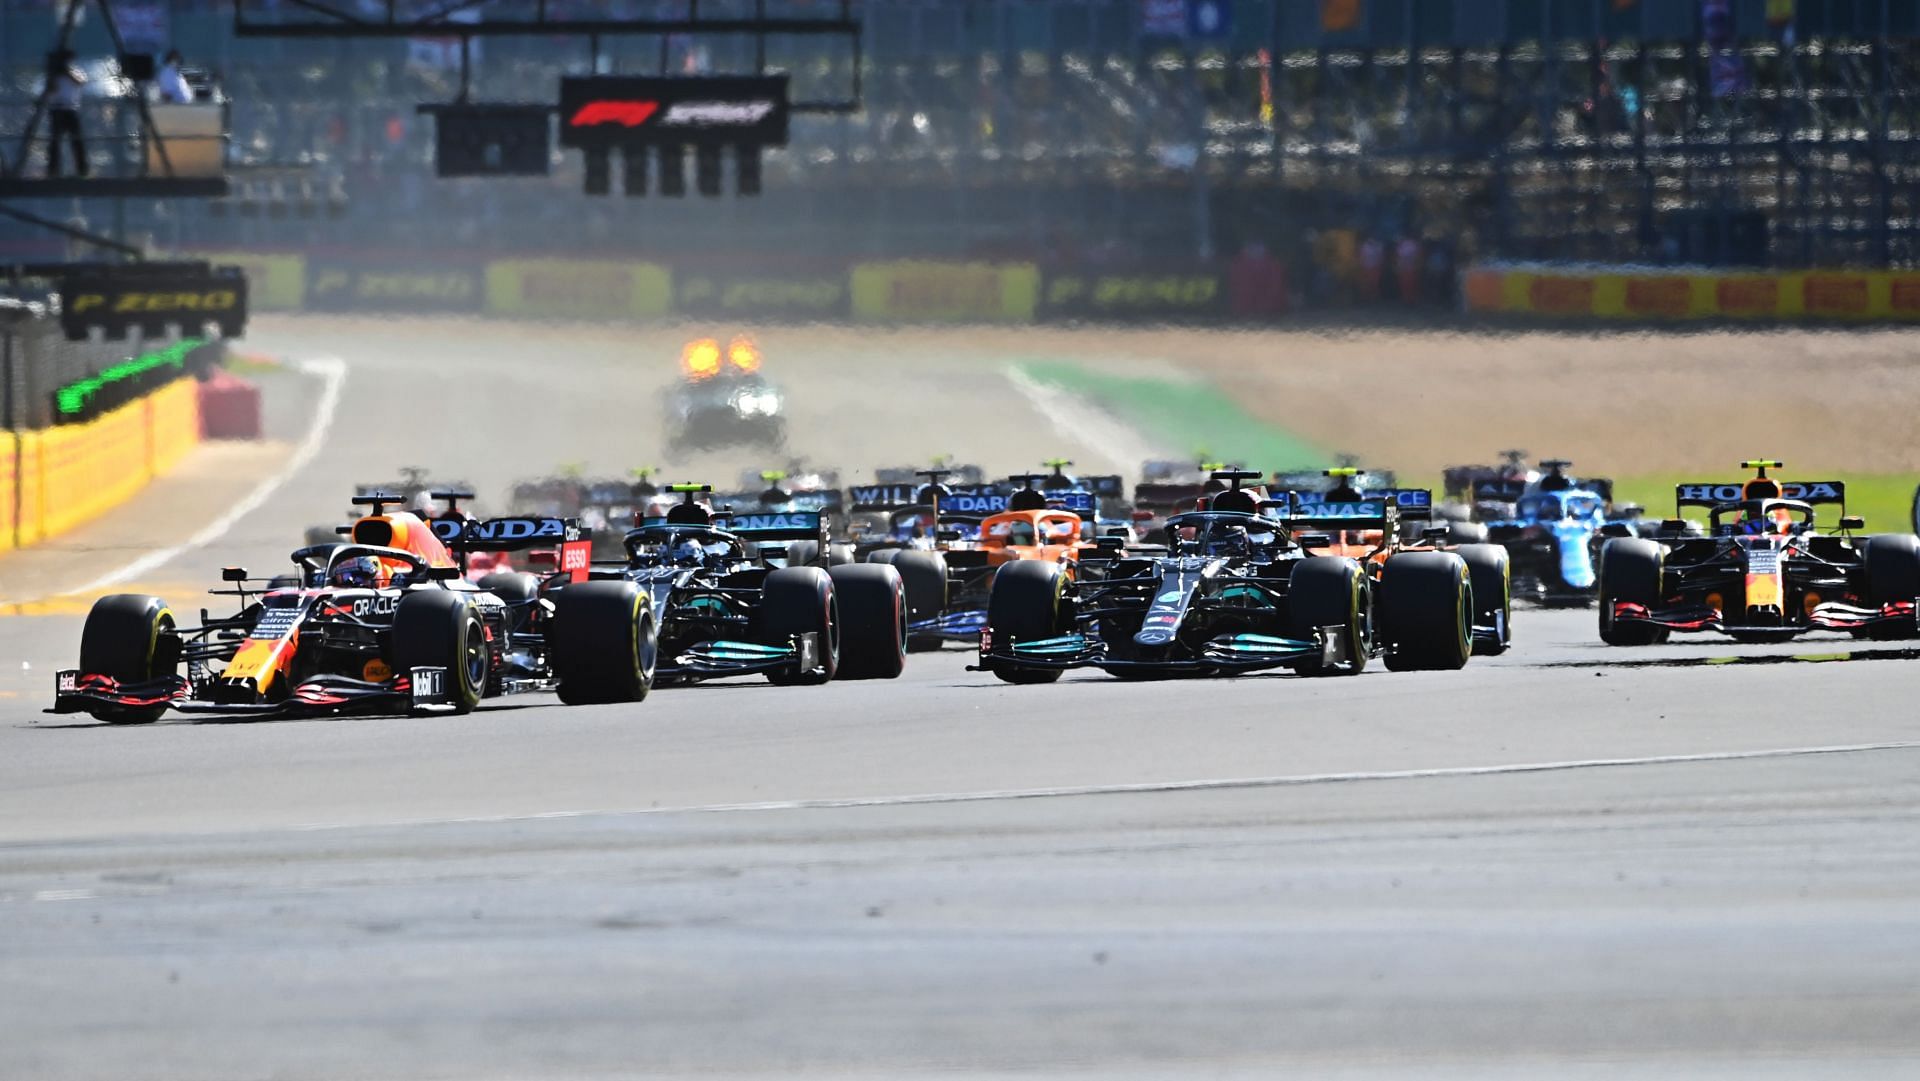 Watch F1 races in-flight or the middle of the ocean, thanks to IMG securing broadcasting rights deal